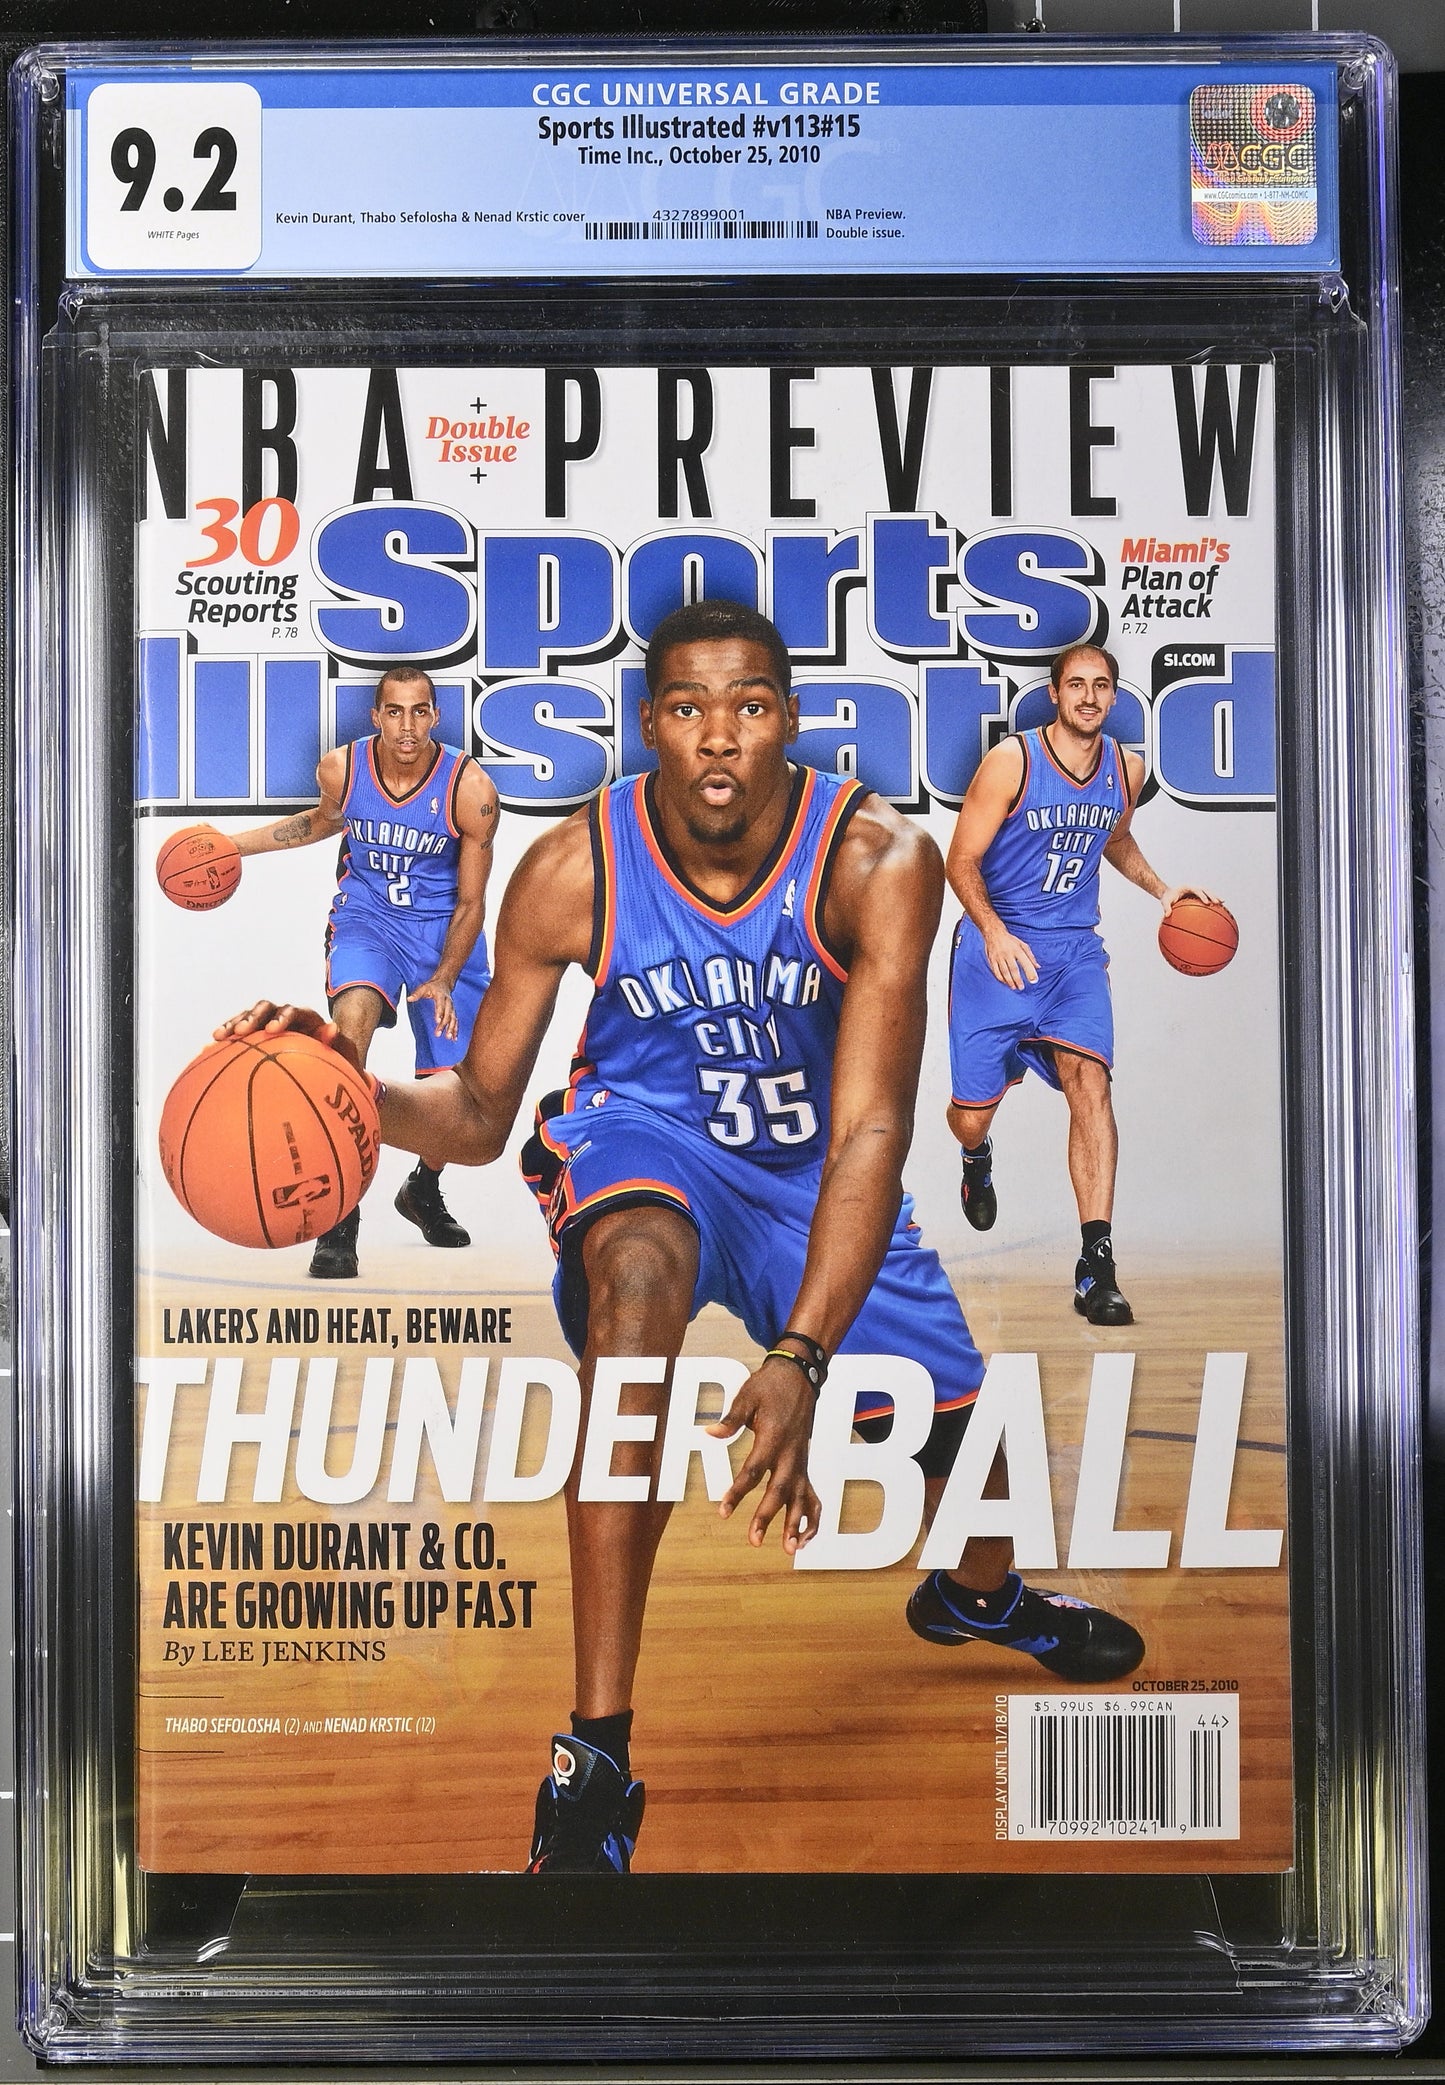 2010 Sports Illustrated Magazine Graded CGC 9.2 Kevin Durant Newsstand